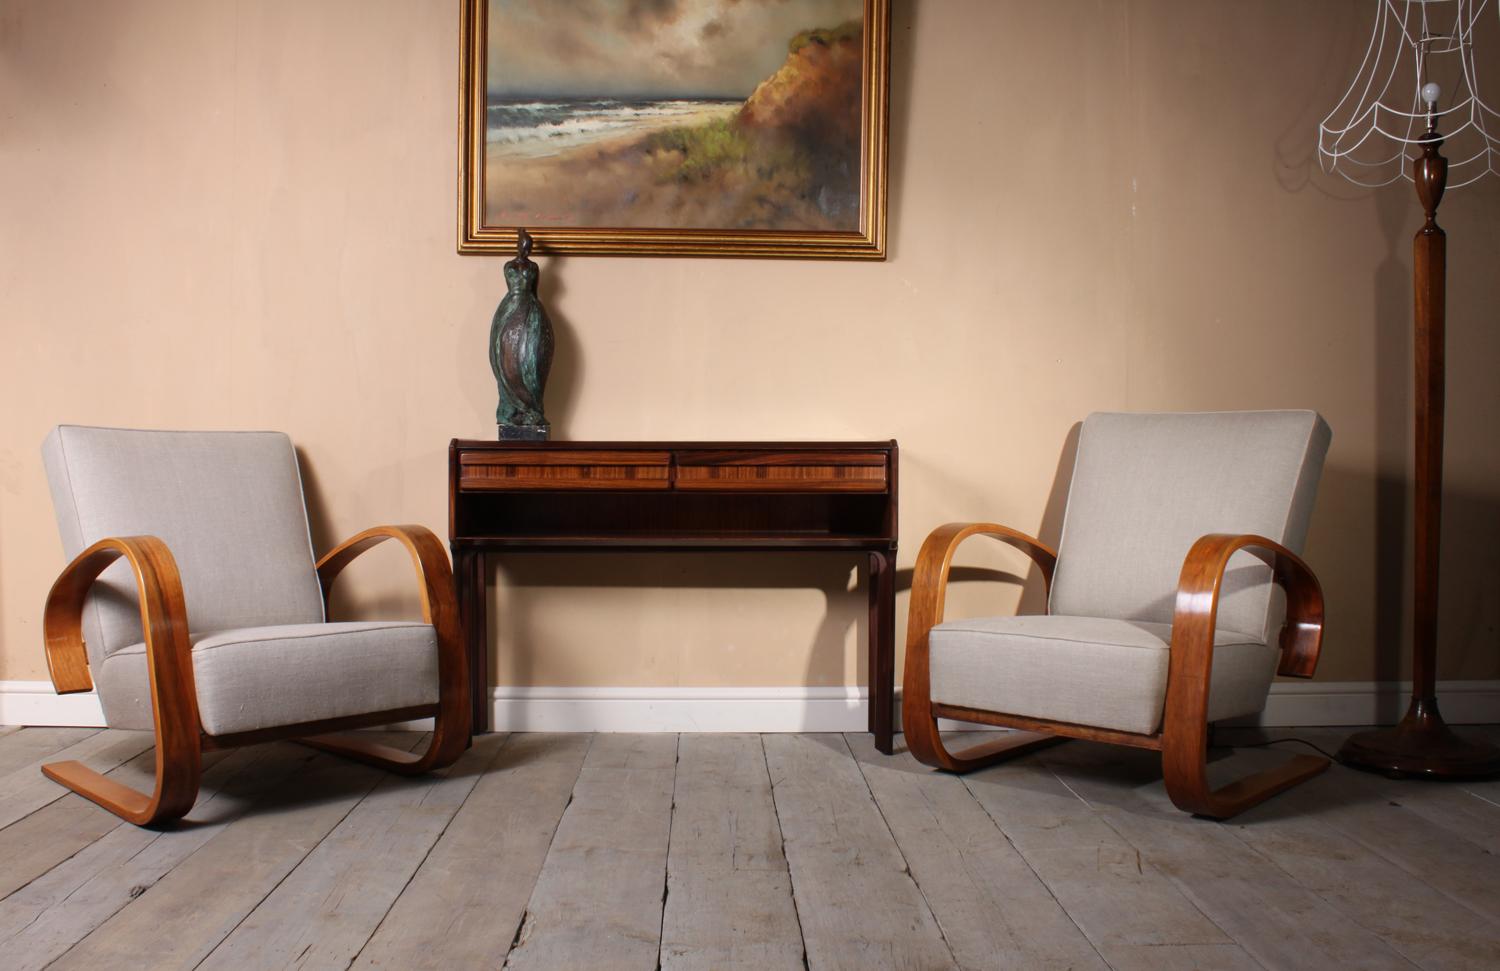 Pair of walnut armchairs by Alvar Aalto, circa 1950
A pair of Armchairs produced by Artek and designed by Alvar Aalto in Finland in the early 1950s the walnut arms have been fully polished and seats have been fully upholstered and then covered in